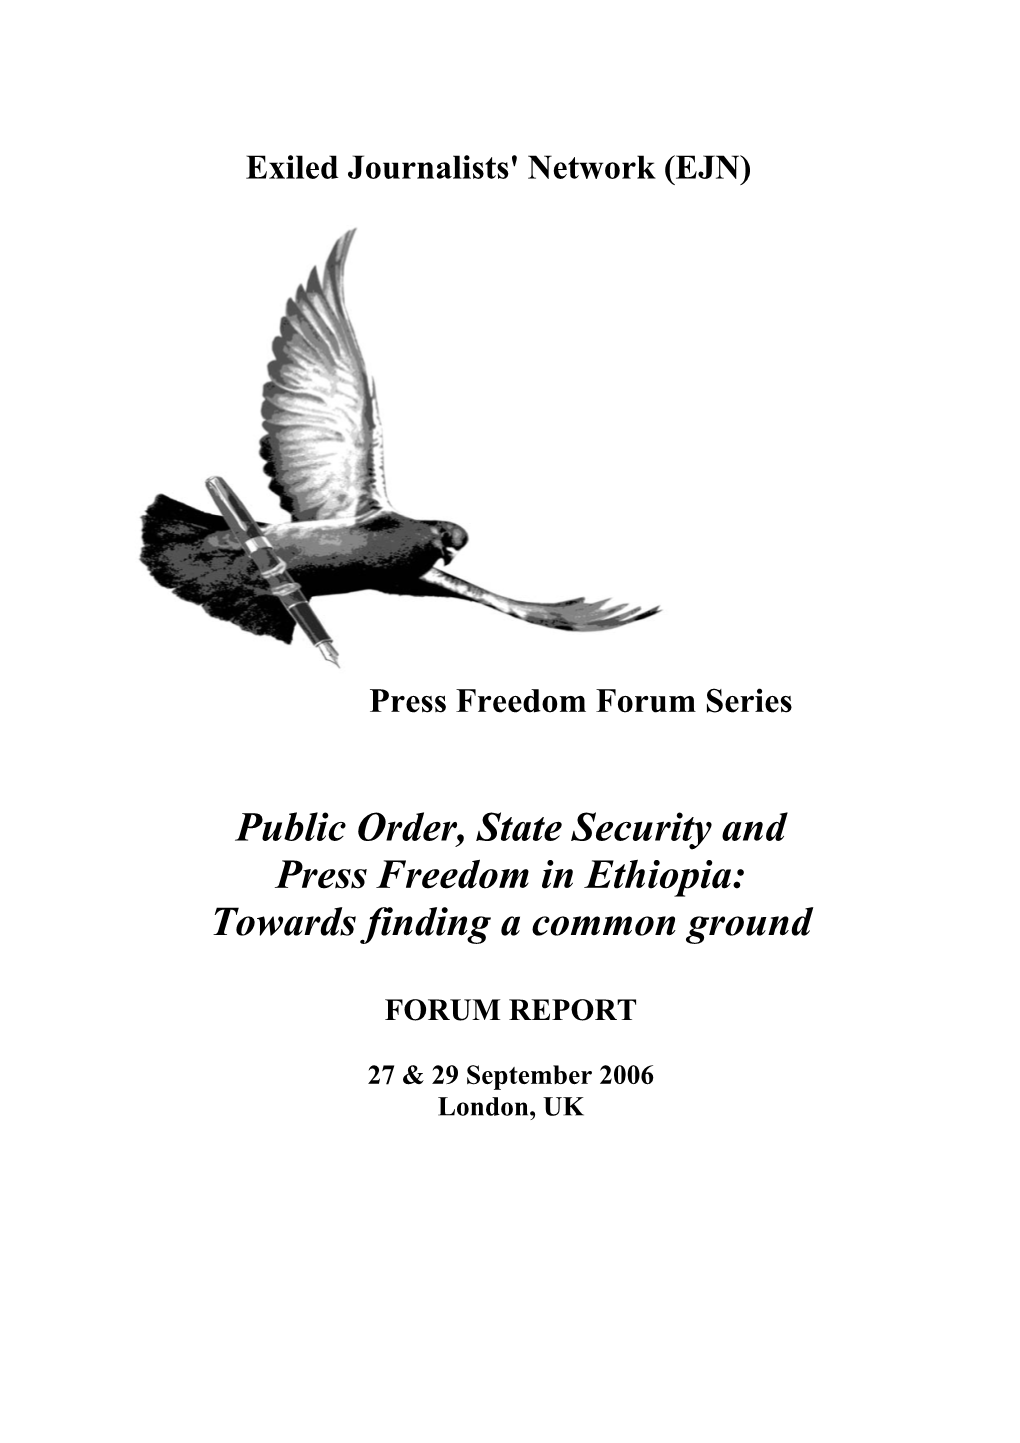 Public Order, State Security and Press Freedom in Ethiopia: Towards Finding a Common Ground